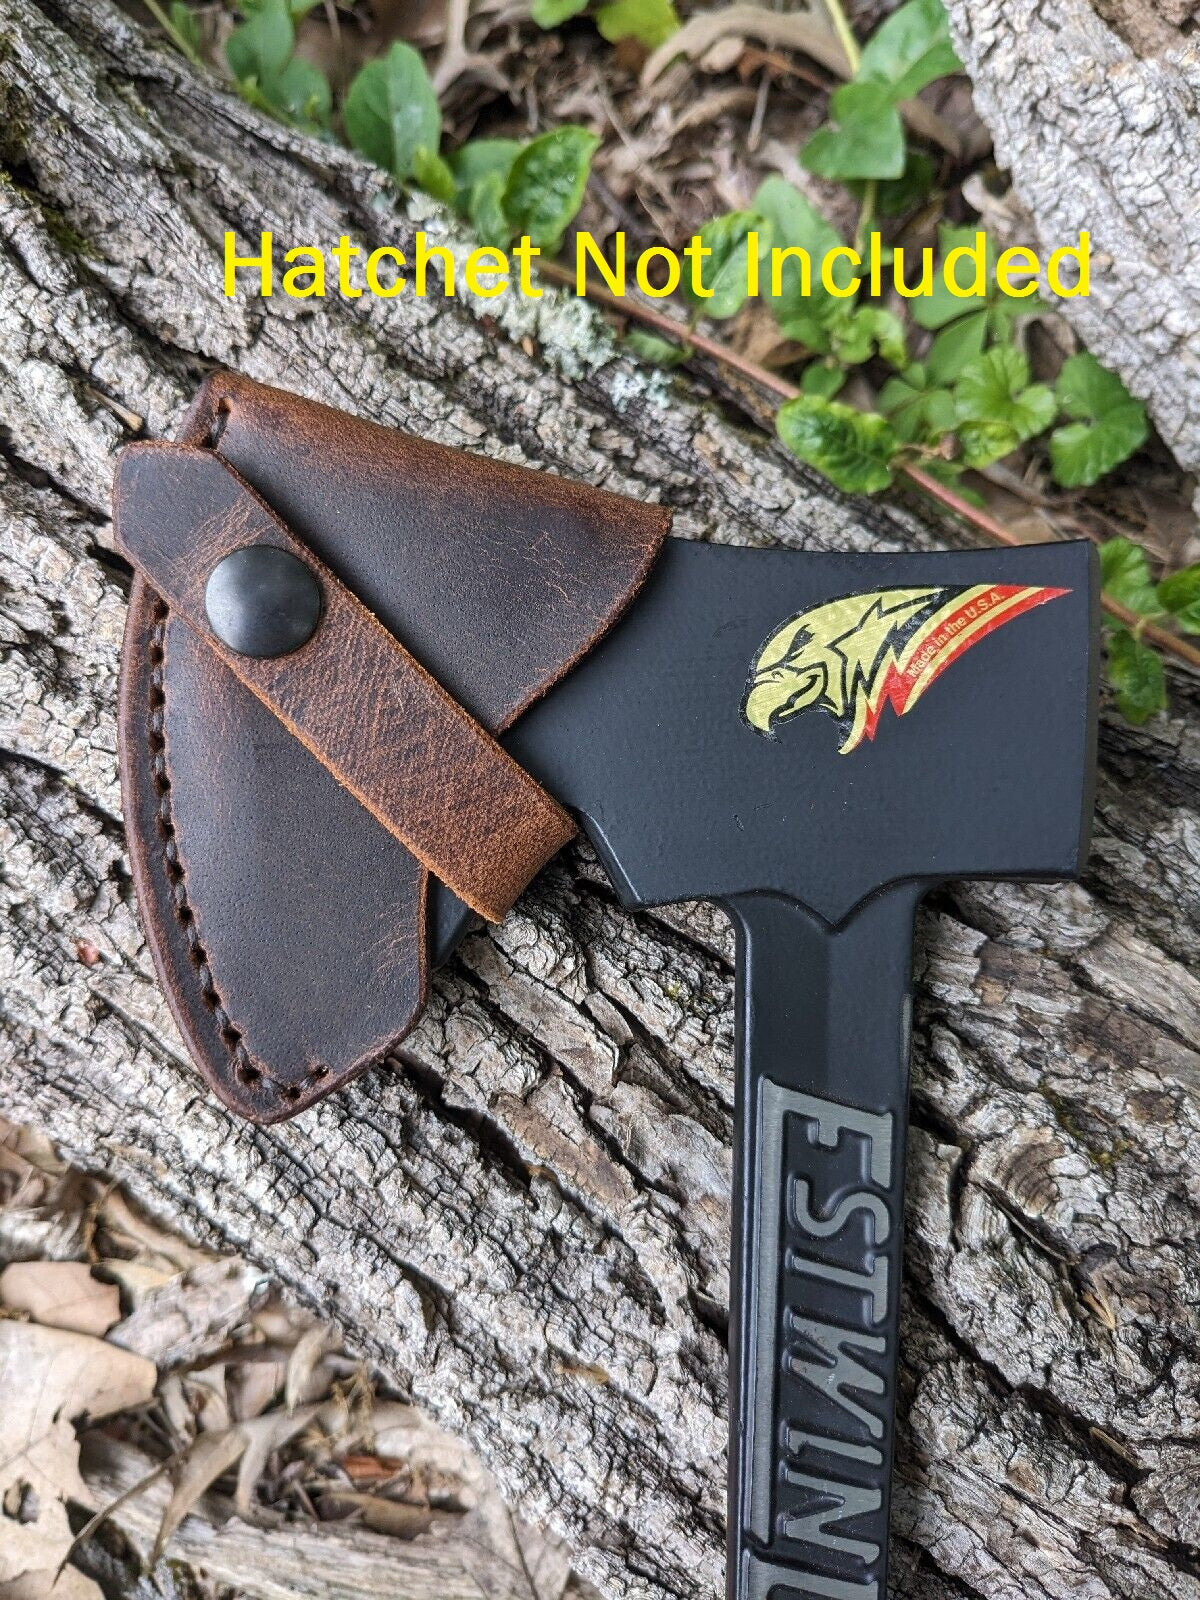 Handmade Leather Sheath For Estwing Hatchet & Axe Models (12" Sportsman, 14" Sportsman, 16" Campers Axe, 26" Campers Axe, Fireside Friend Maul, Camper's Axe Stake Puller)